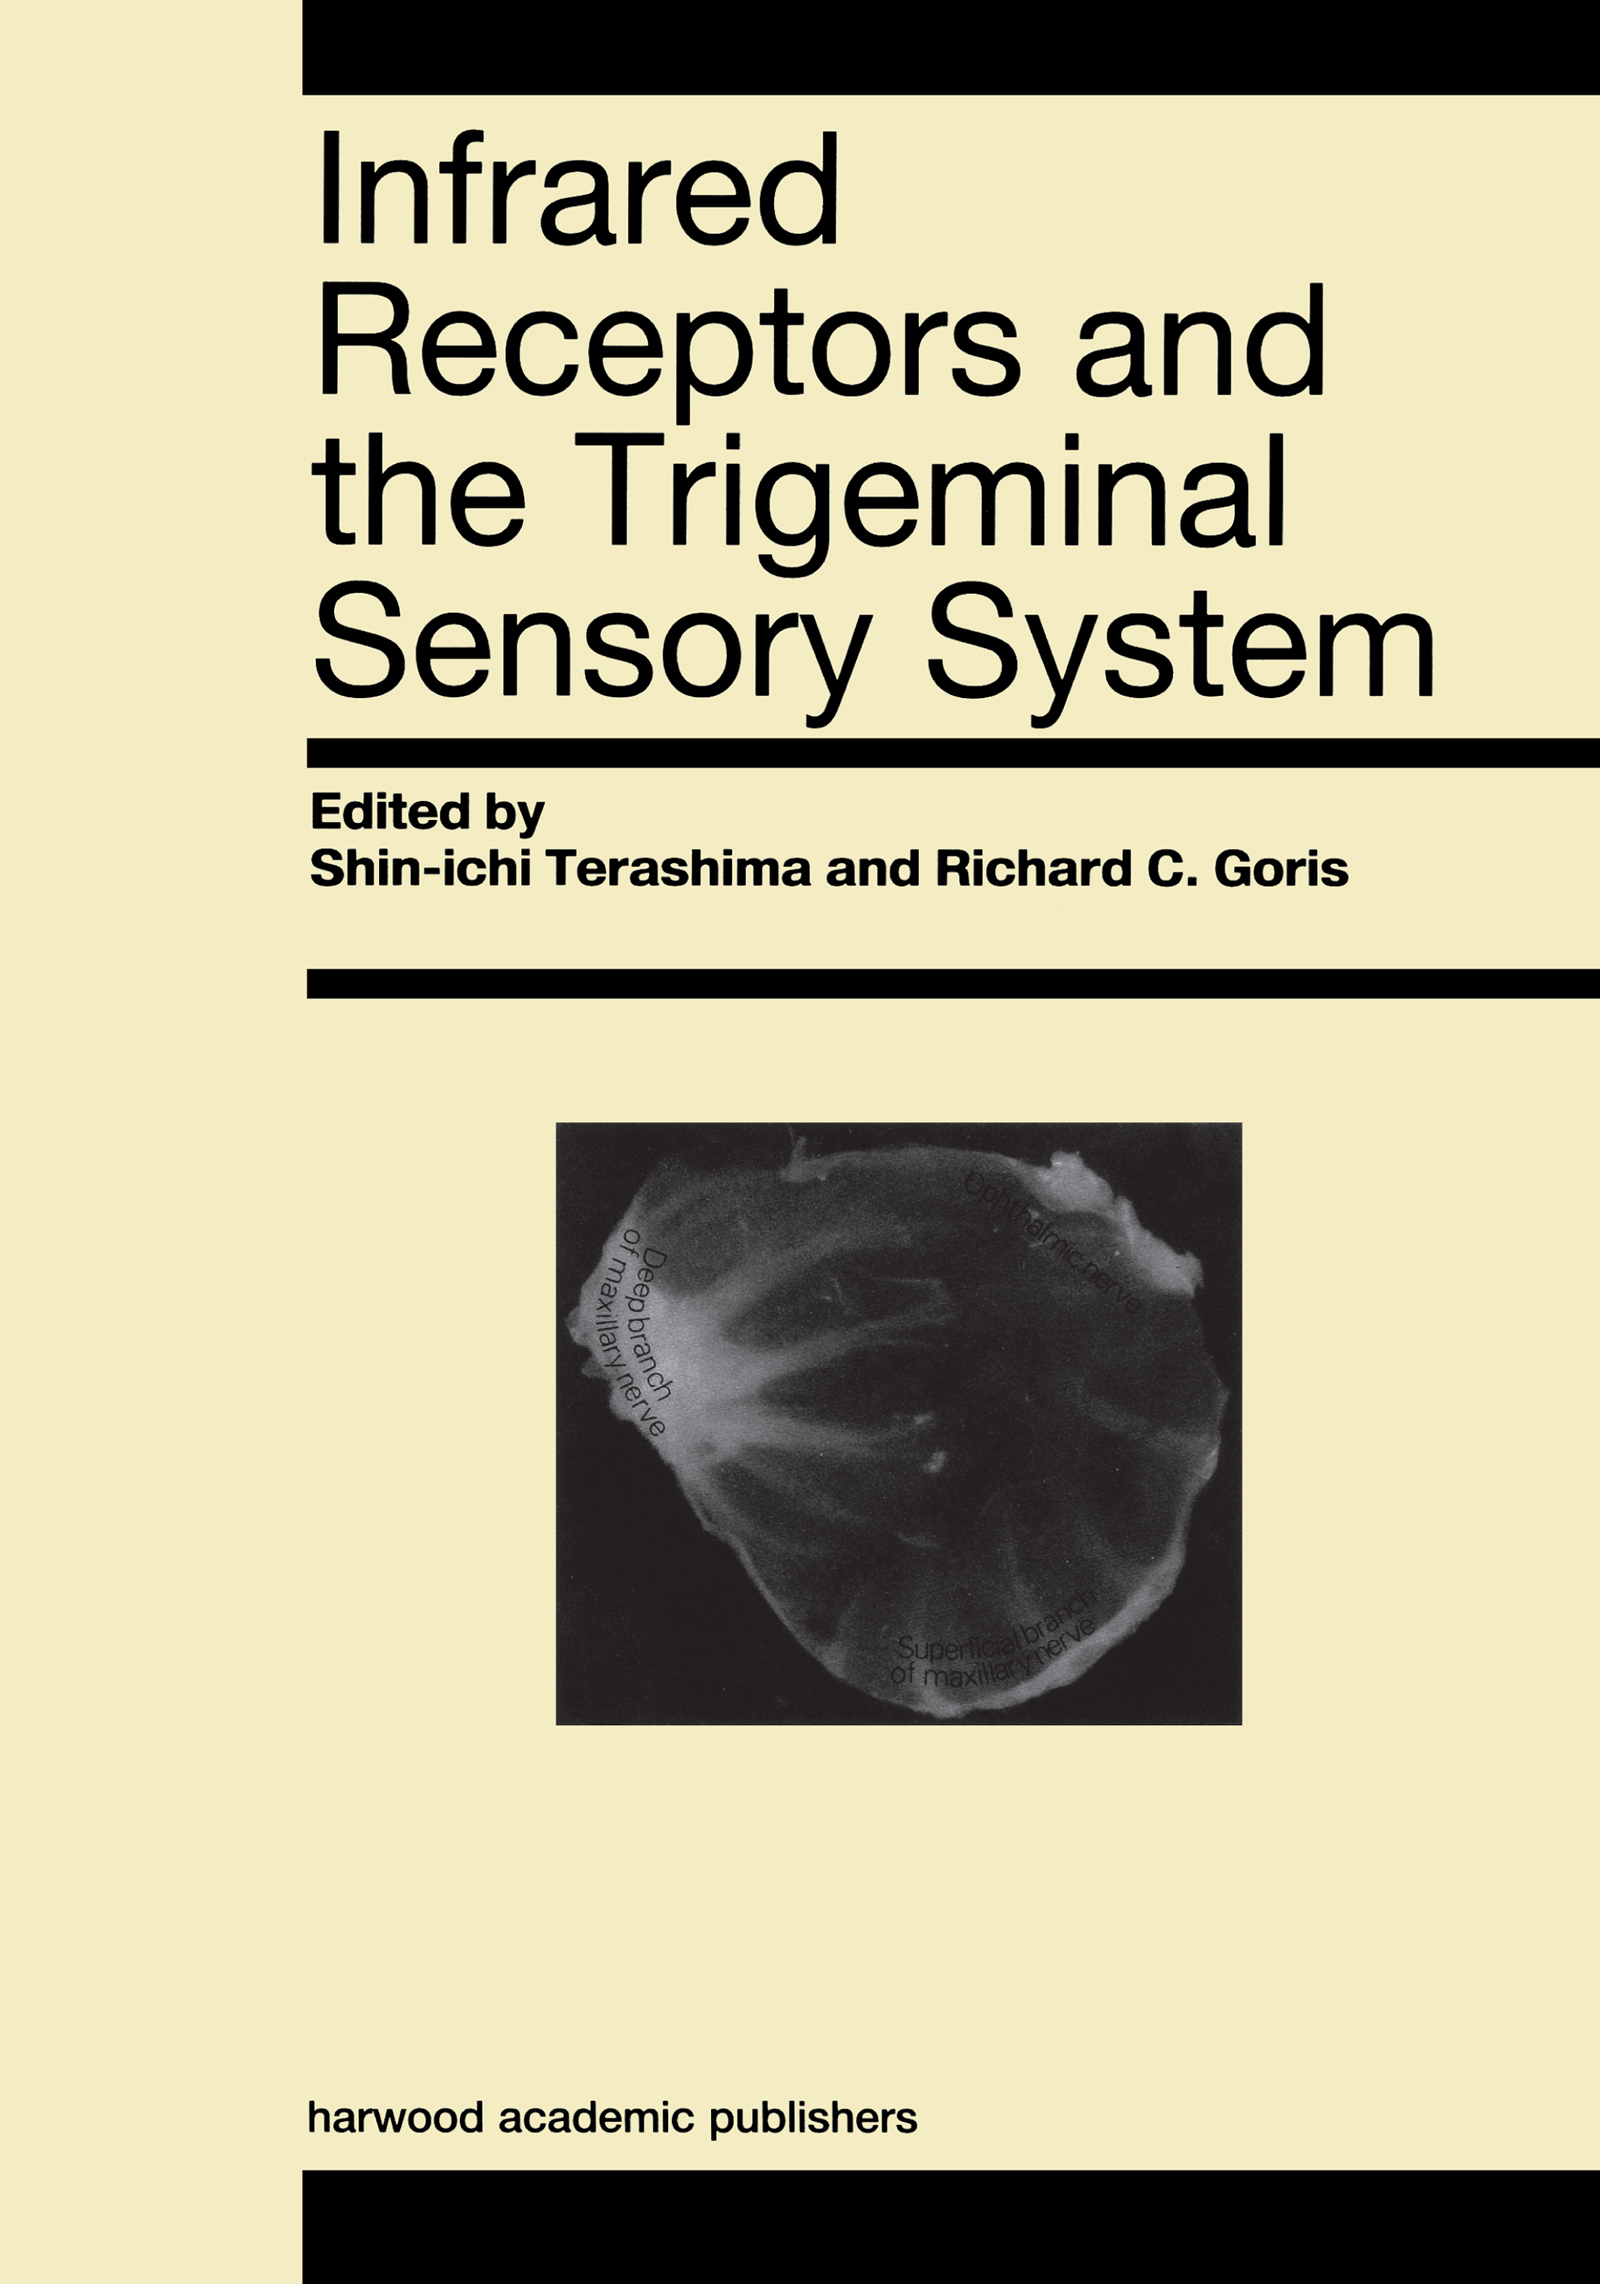 Infrared Receptors and the Trigeminal Sensory System - >100